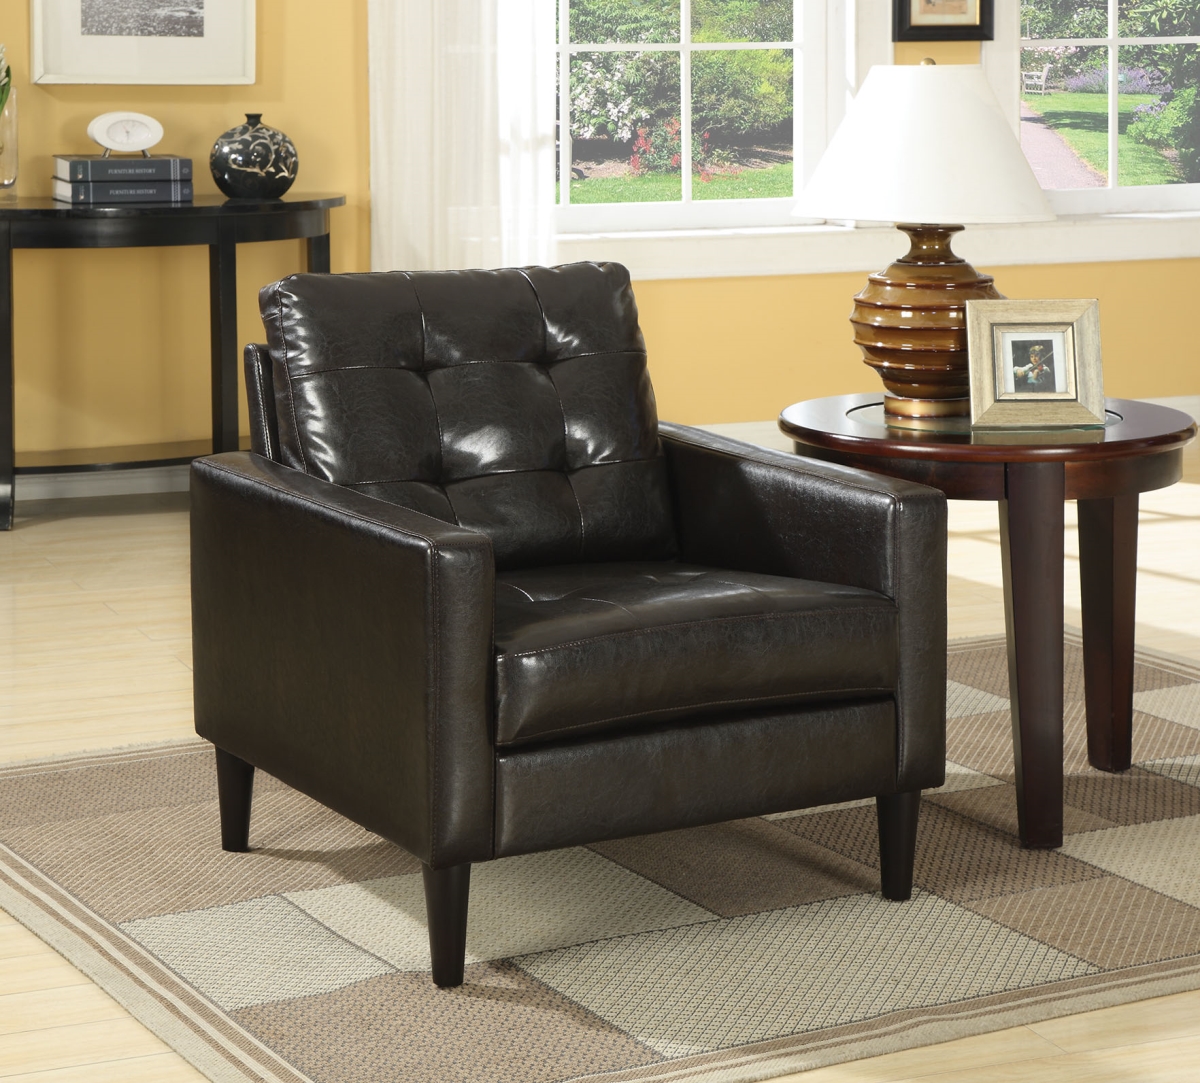 Home Roots Furniture 285686 32 X 30 X 30 In. Wood & Plywood Accent Chair - Espresso Pu